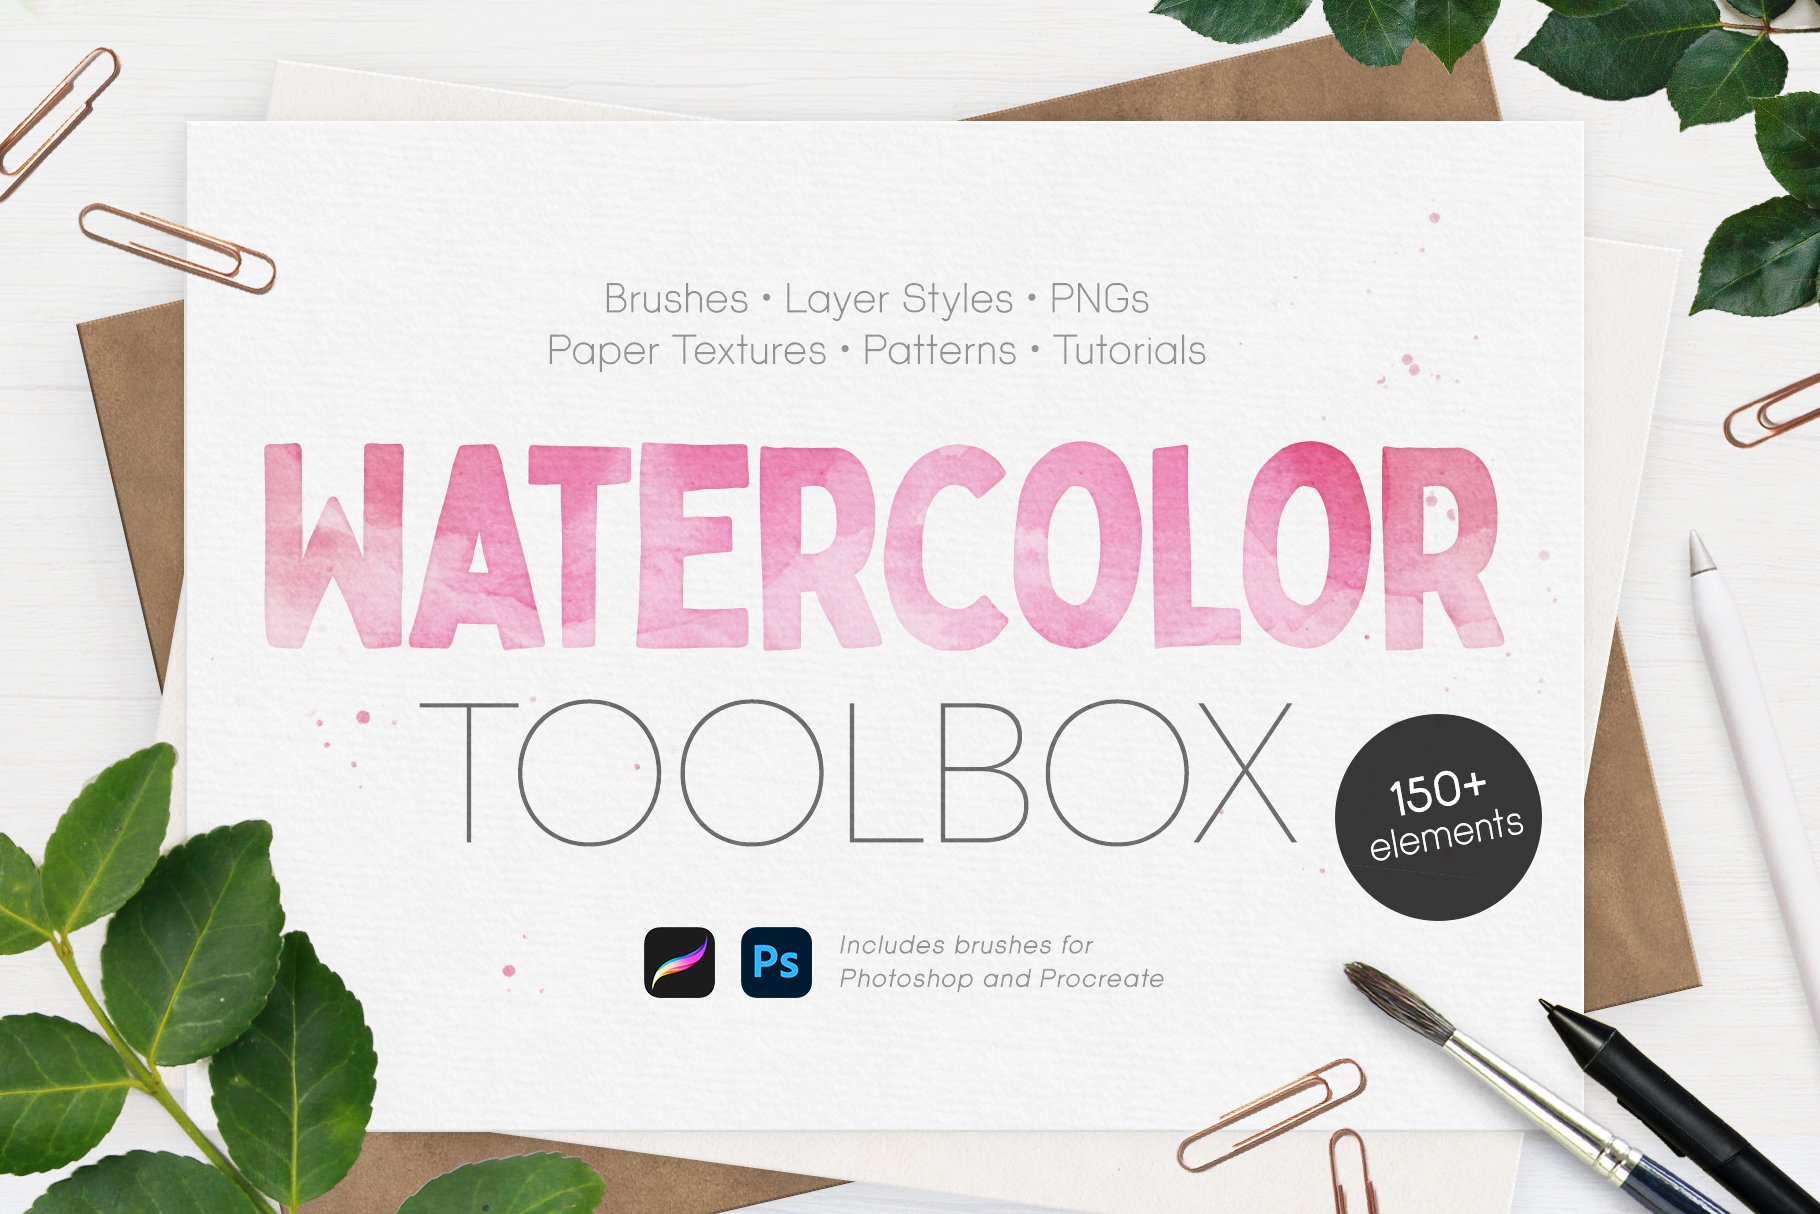 The Ultimate Watercolor Toolboxcover image.